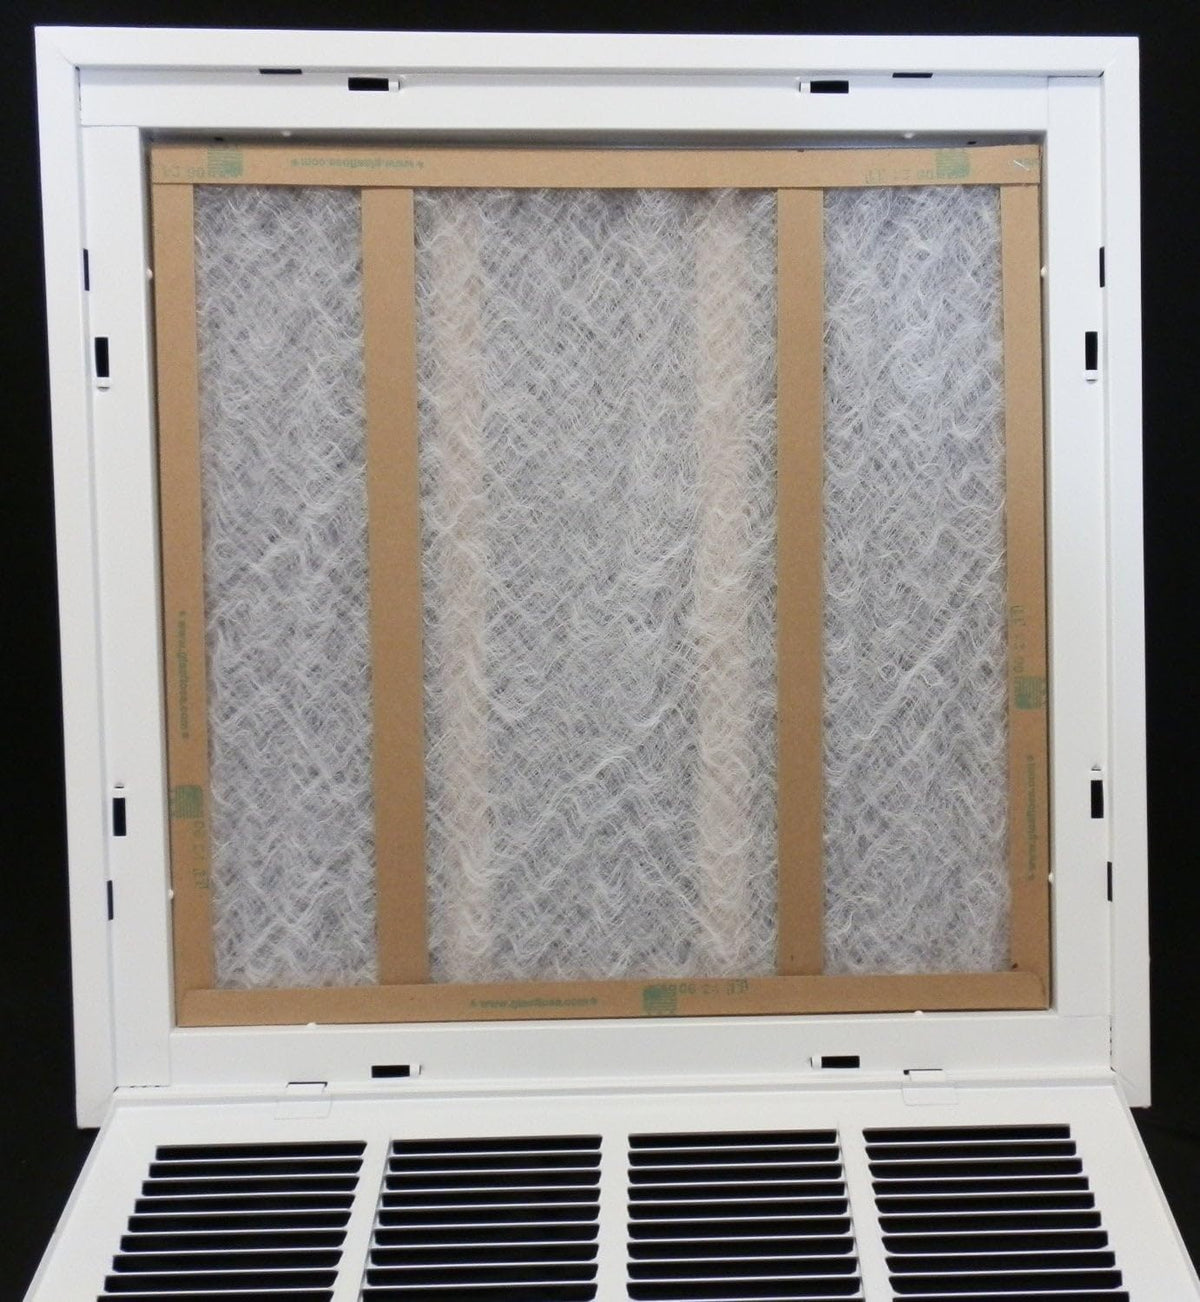 26&quot; X 26&quot; Steel Return Air Filter Grille for 1&quot; Filter - Removable Frame - [Outer Dimensions: 28 5/8&quot; X 28 5/8&quot;]